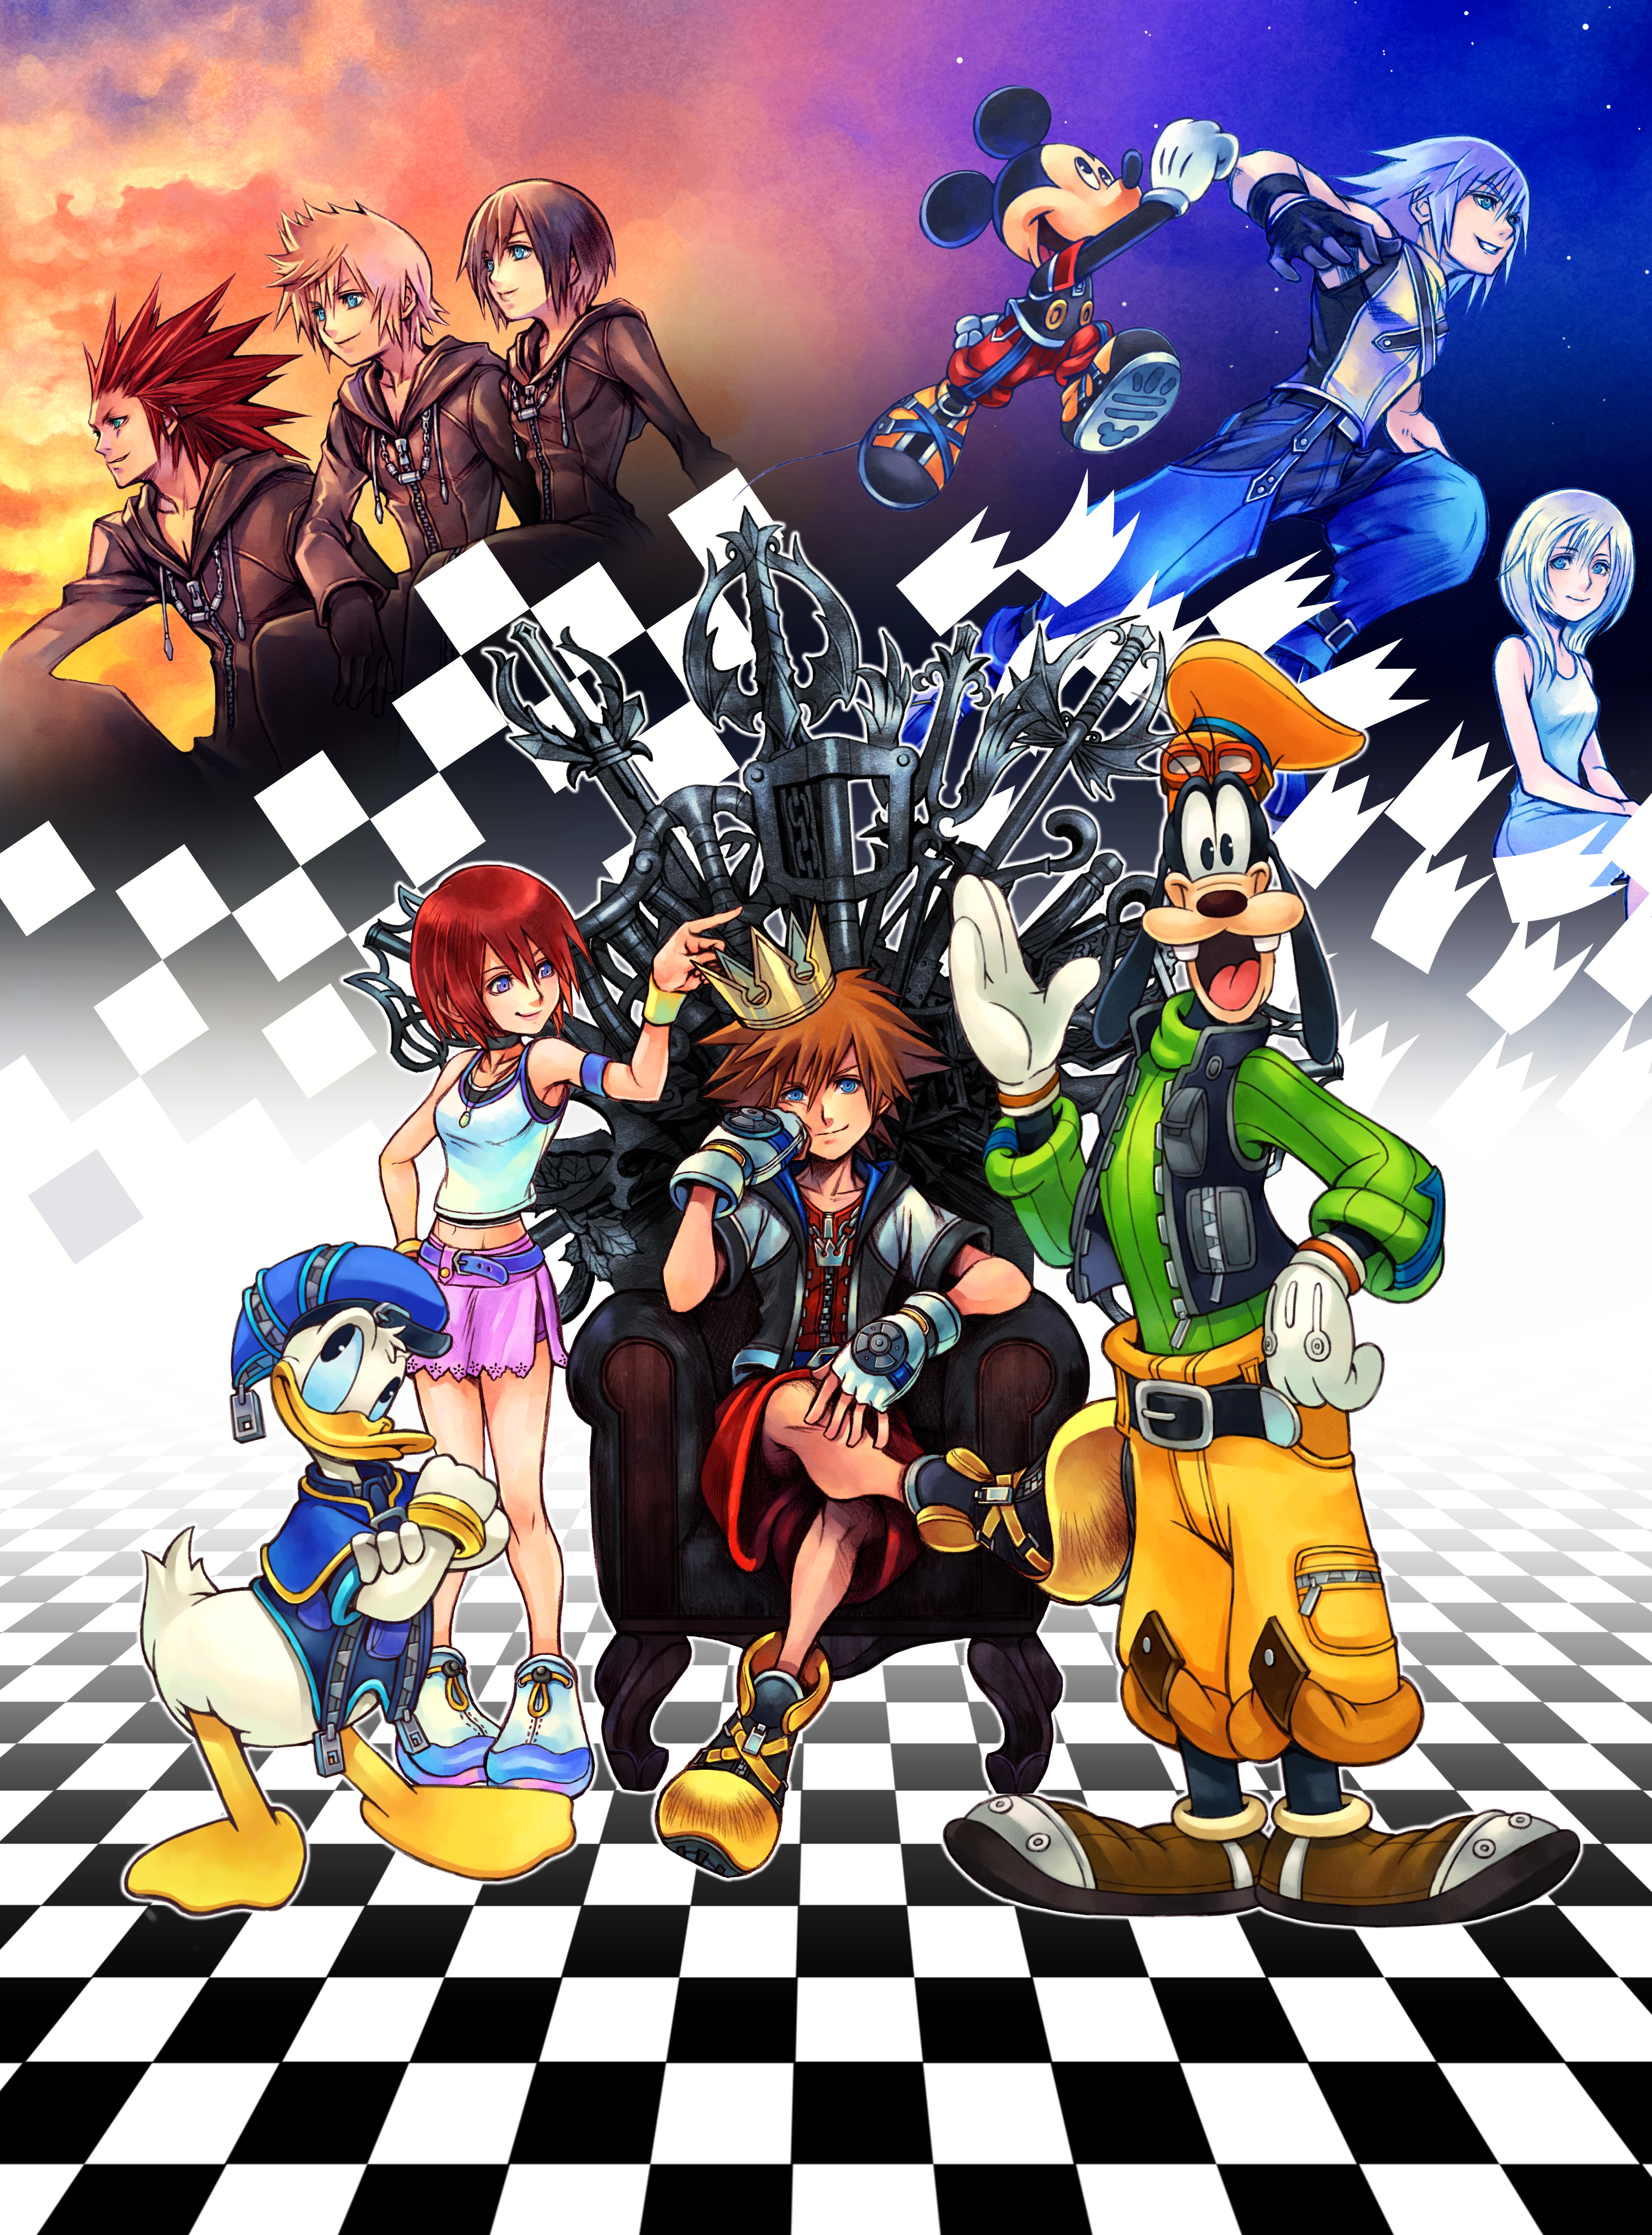 Free Download Kingdom Hearts 15 Smartphone Wallpaper Ps3 Theme From 7 11 News 5400x7304 For Your Desktop Mobile Tablet Explore 47 Kingdom Hearts Wallpaper For Phone Kingdom Hearts Iphone